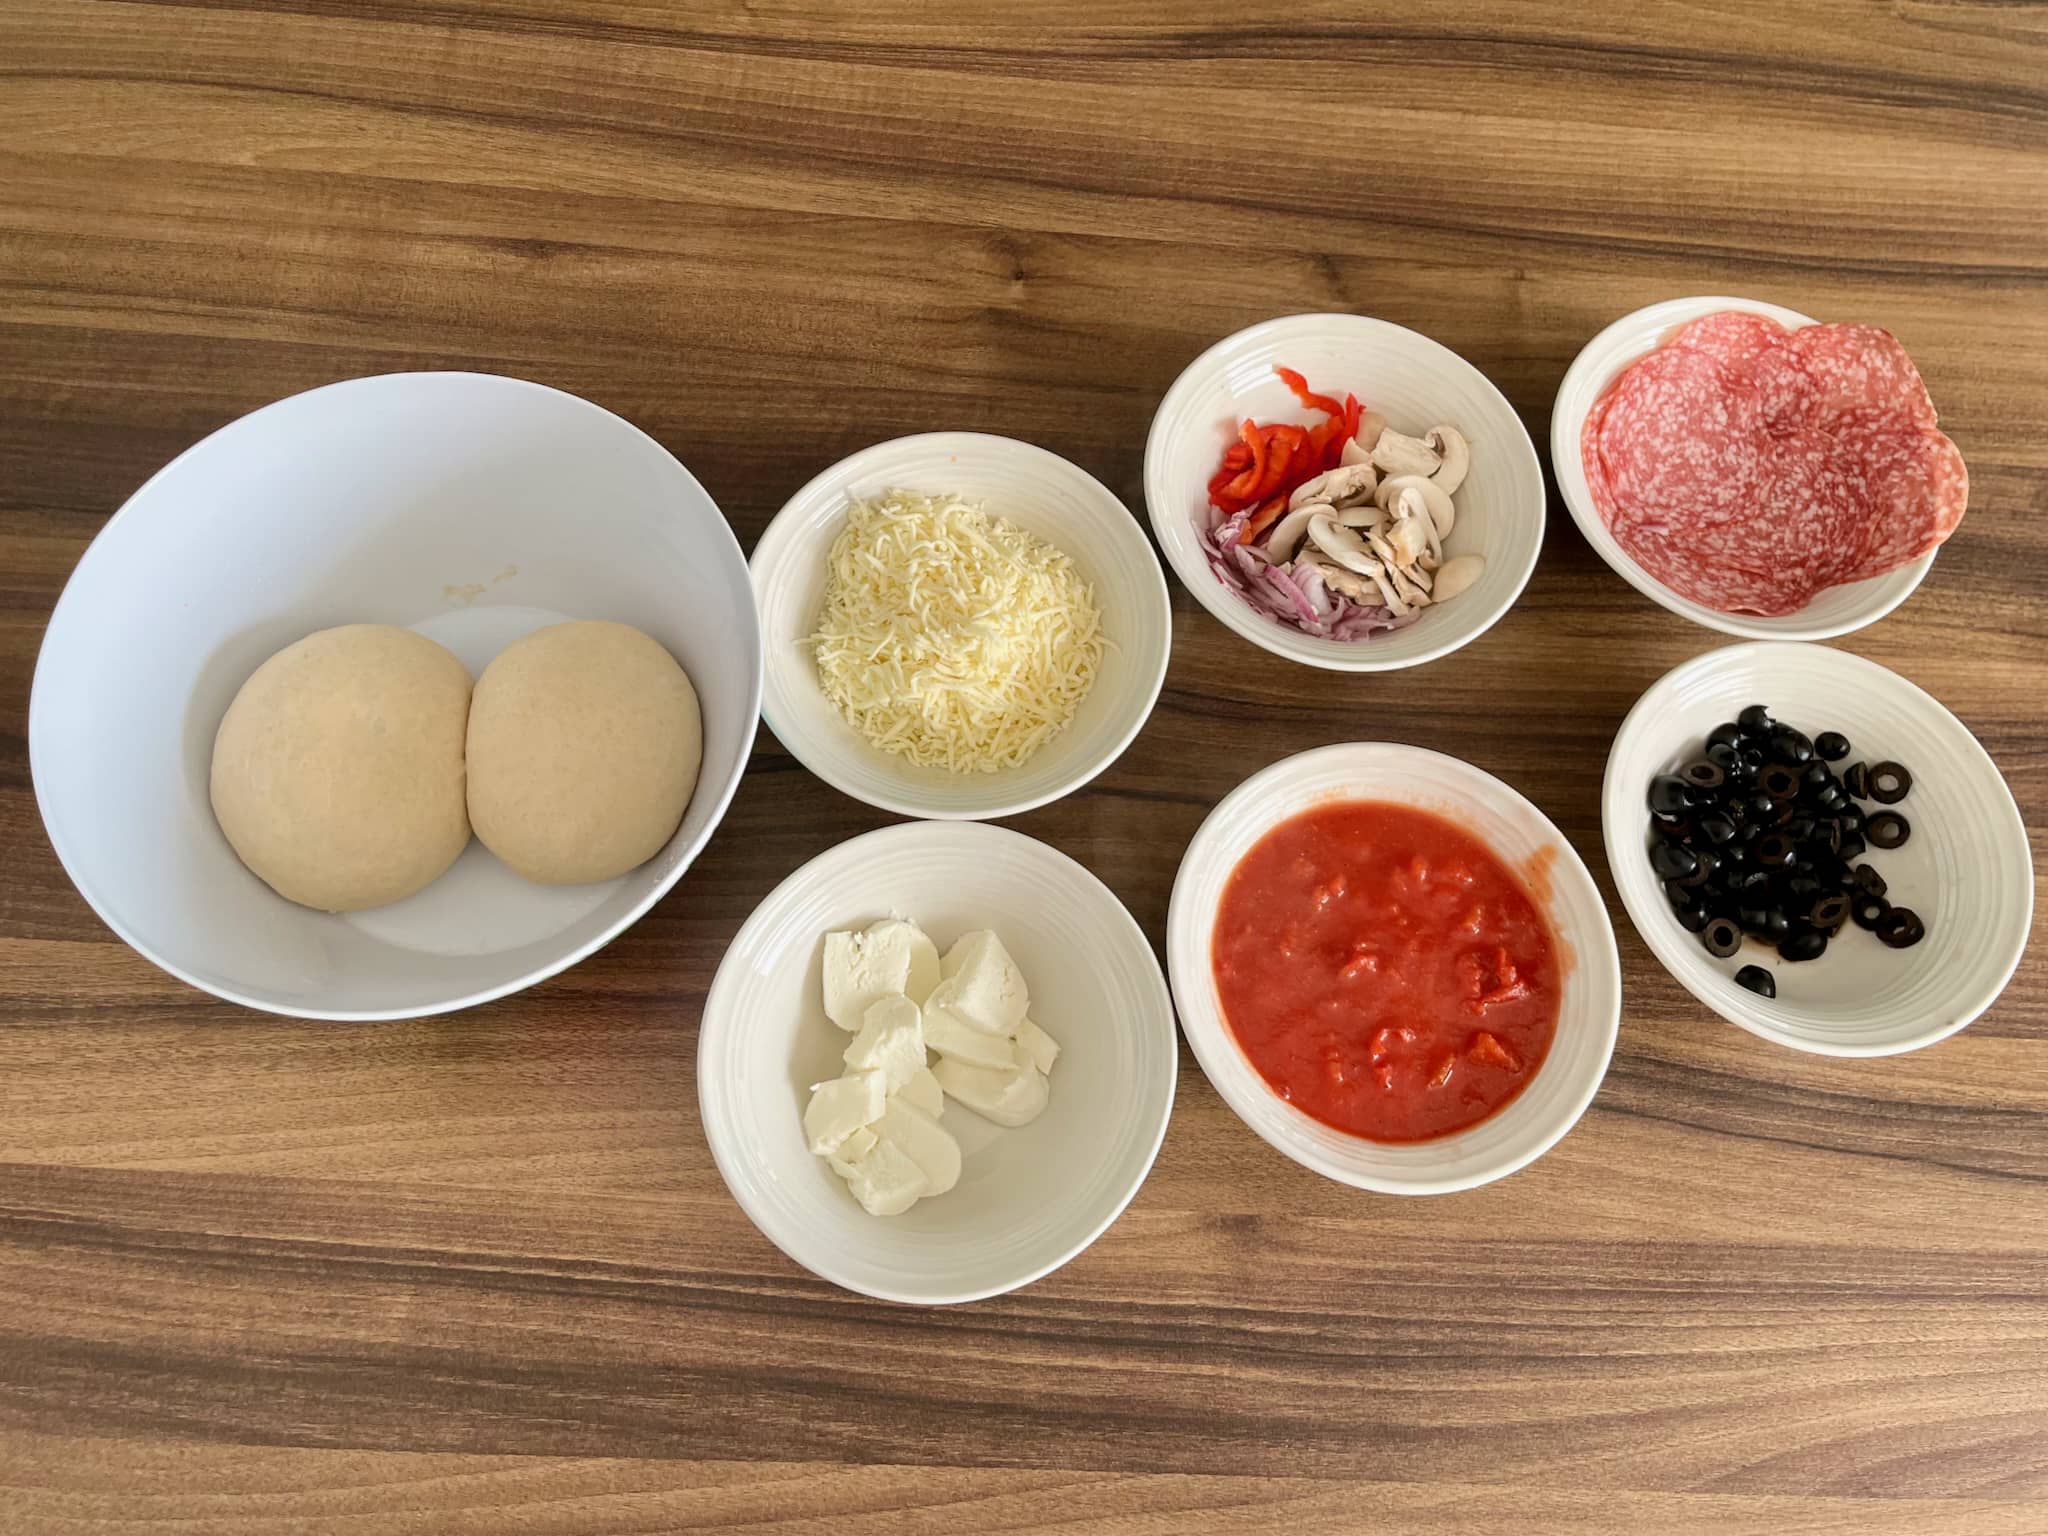 Dough, sauce and toppings